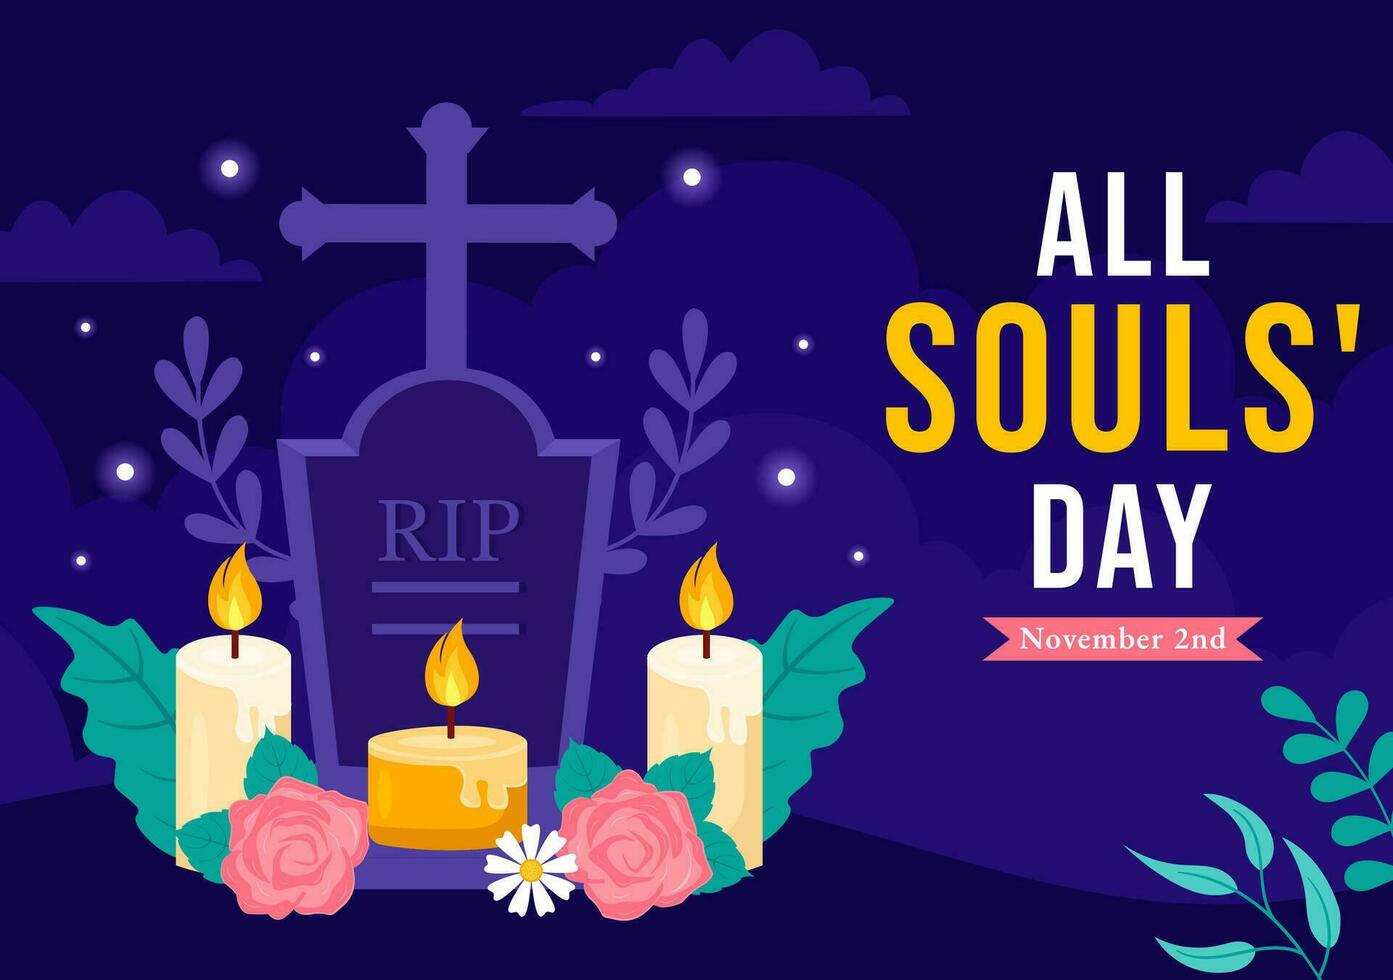 All Souls Day Vector Illustration to Commemorate All Deceased Believers in the Christian Religion with Candles in Flat Cartoon Background Design